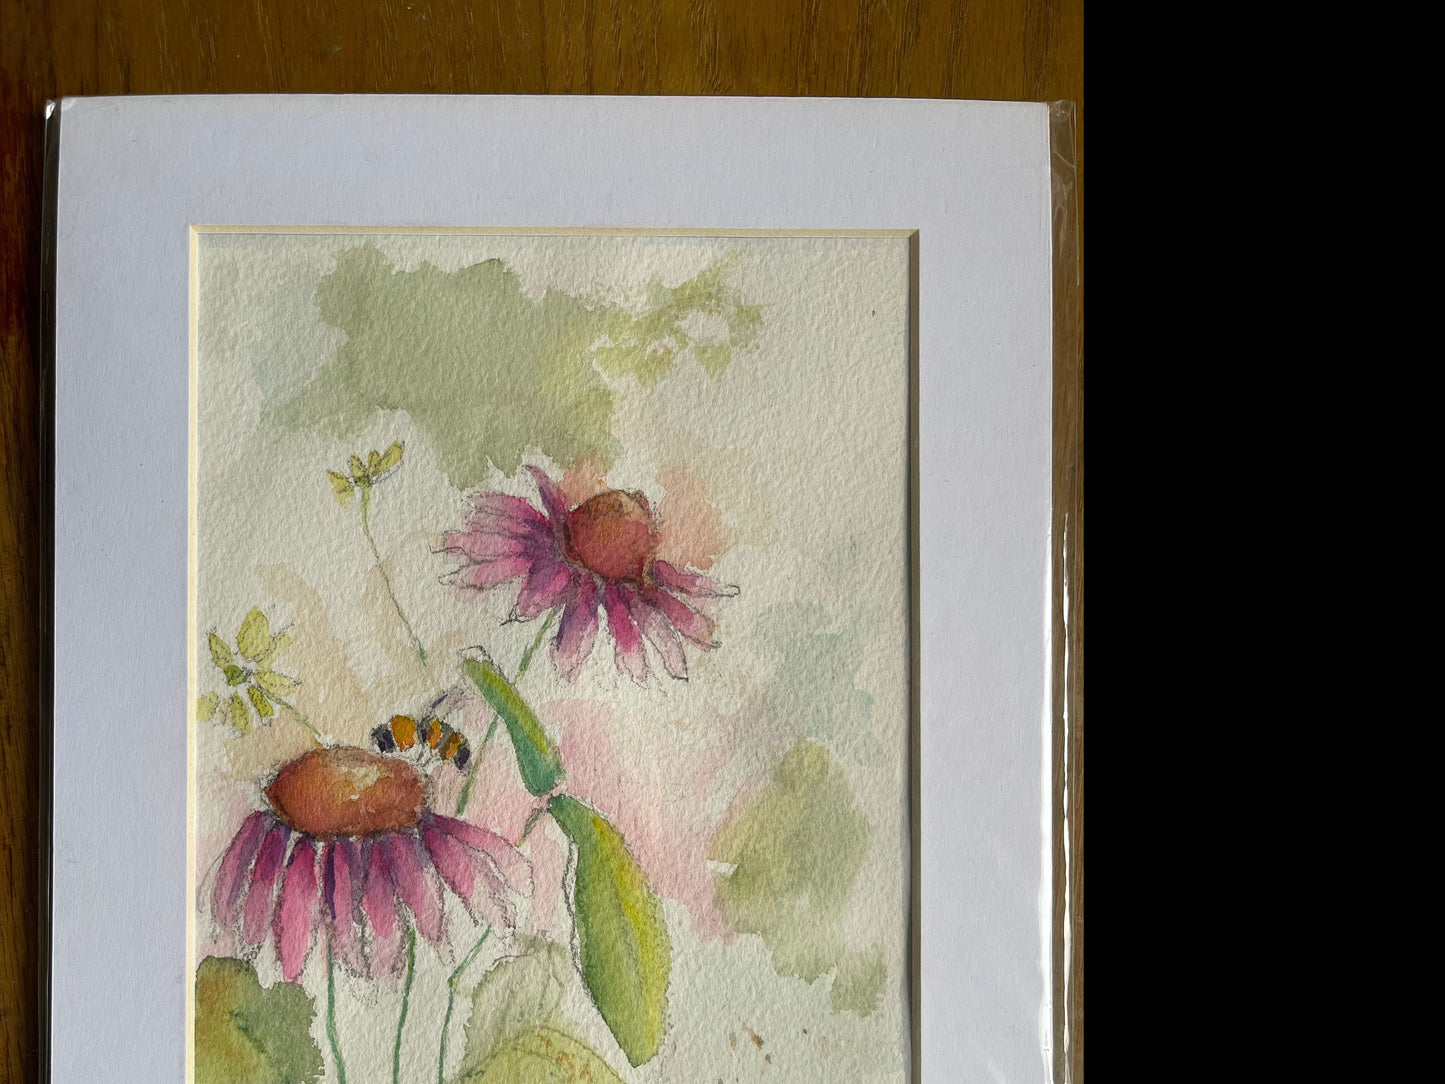 Bumble Bee on a Coneflower Original Watercolor Painting 6x8